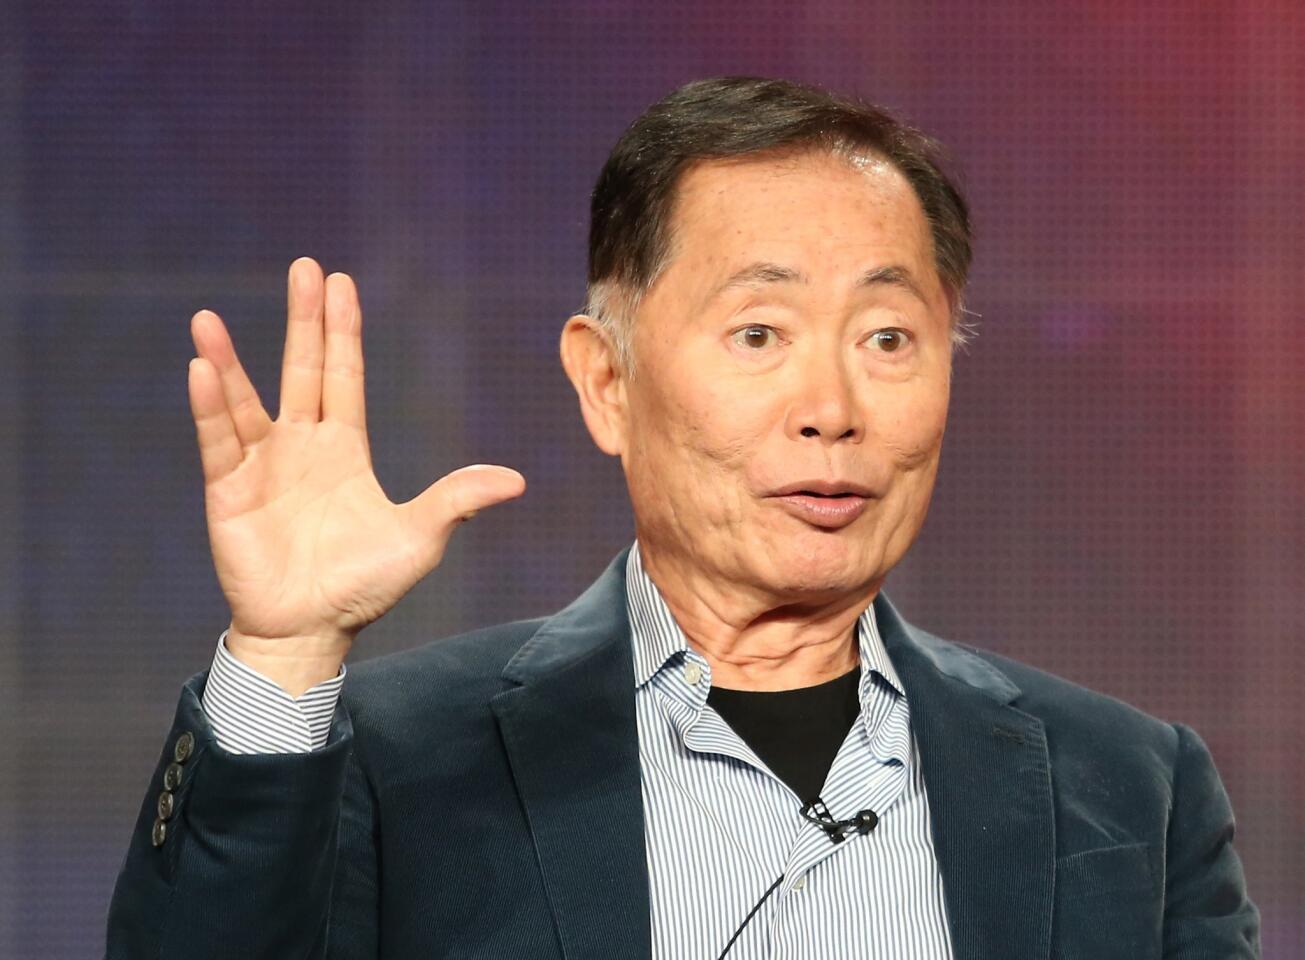 George Takei to William Shatner: 'Why have this tension?'